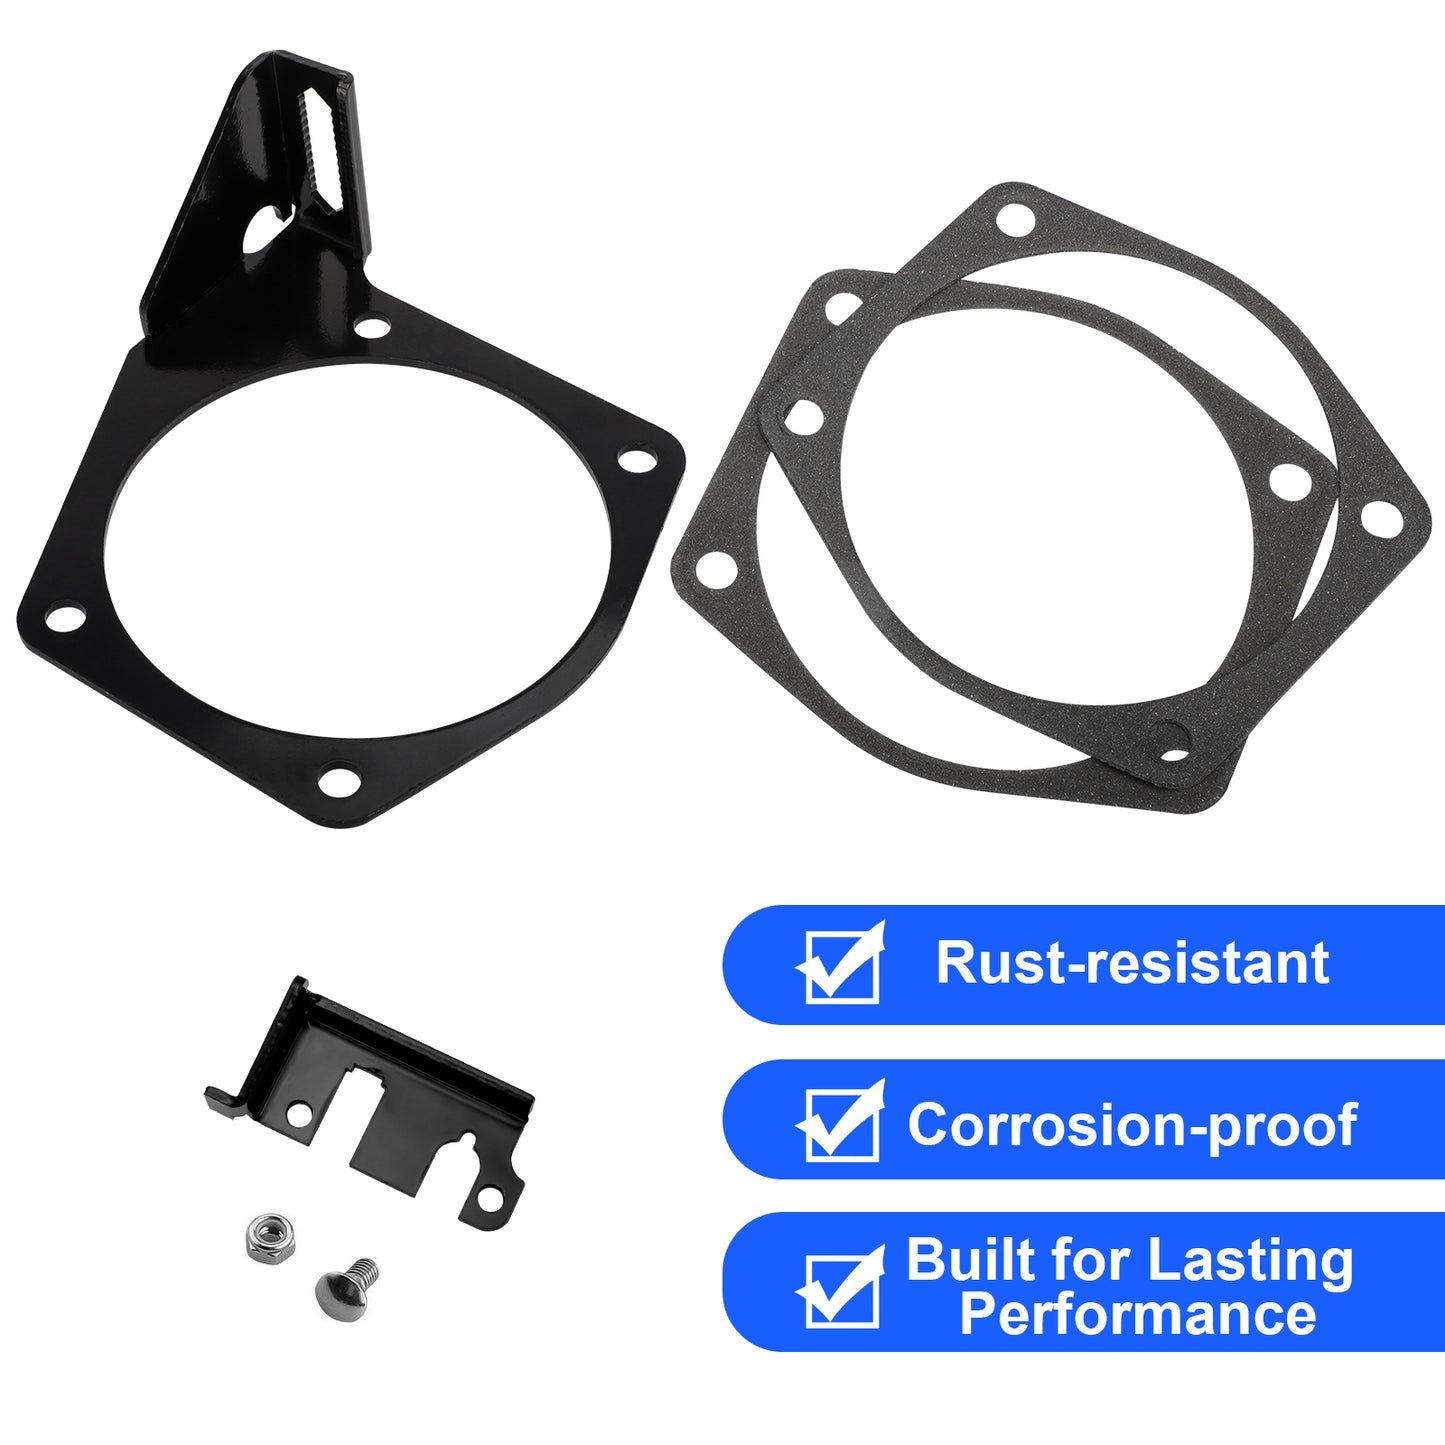 Throttle Cable Bracket - Throttle Body Cable Bracket for 92-102mm LS LS1 LS3 LS6 4 Bolts Intake Manifold Car Accessories